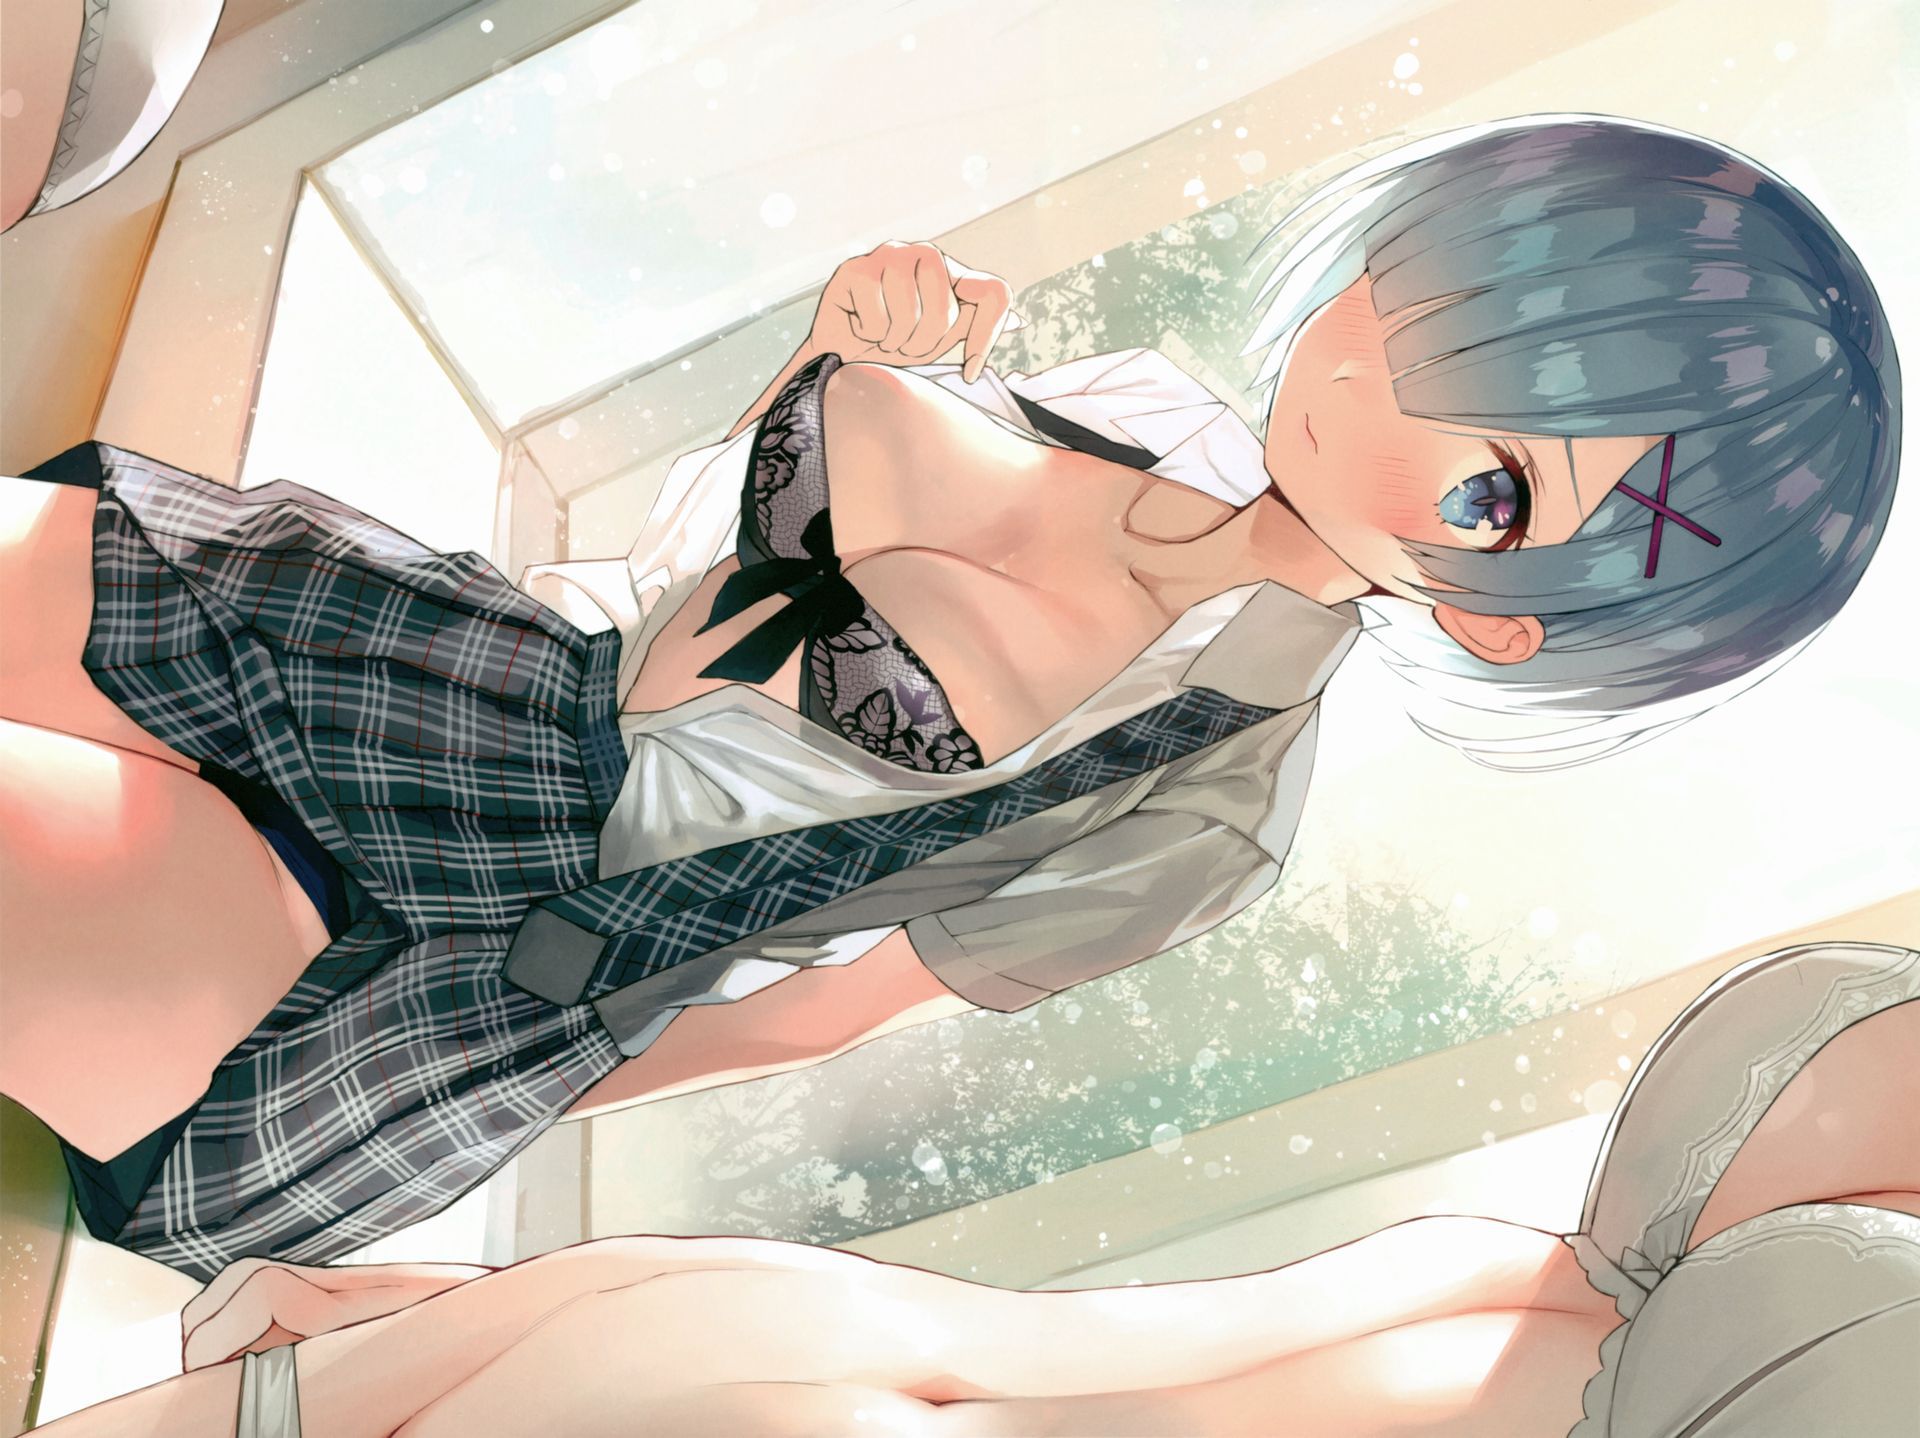 Erotic anime summary Erotic image of a girl who is too while wearing a bra [secondary erotic] 23